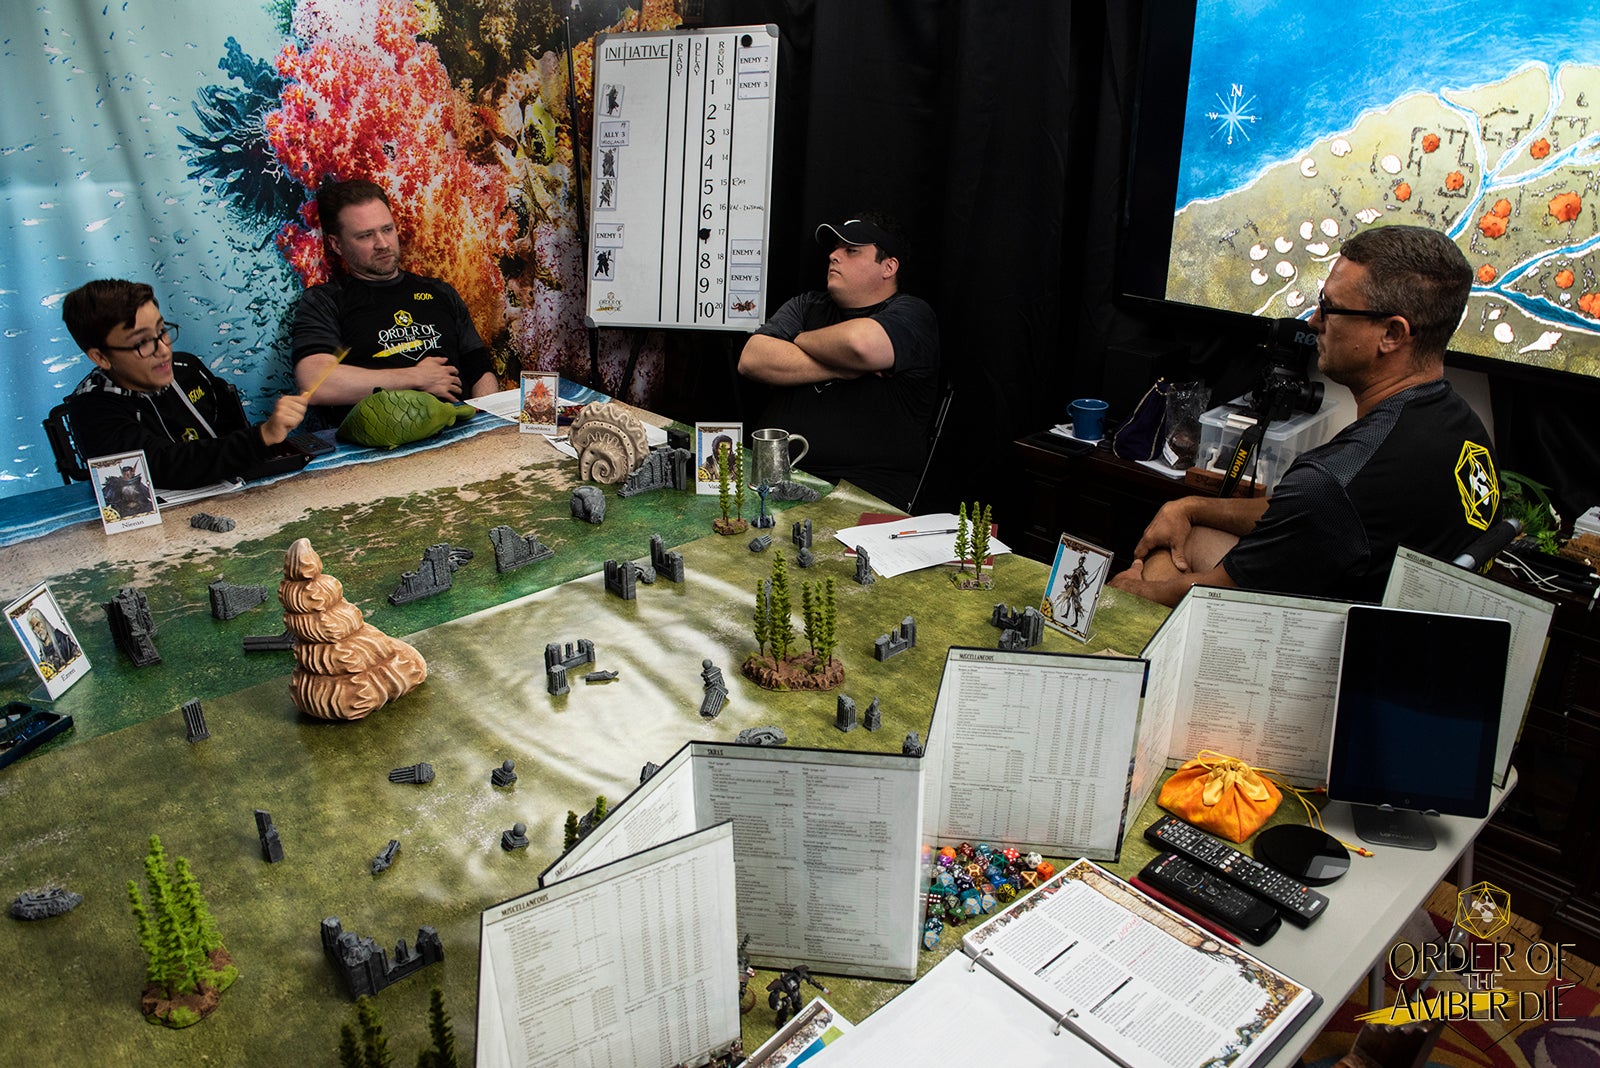 Players around their table model